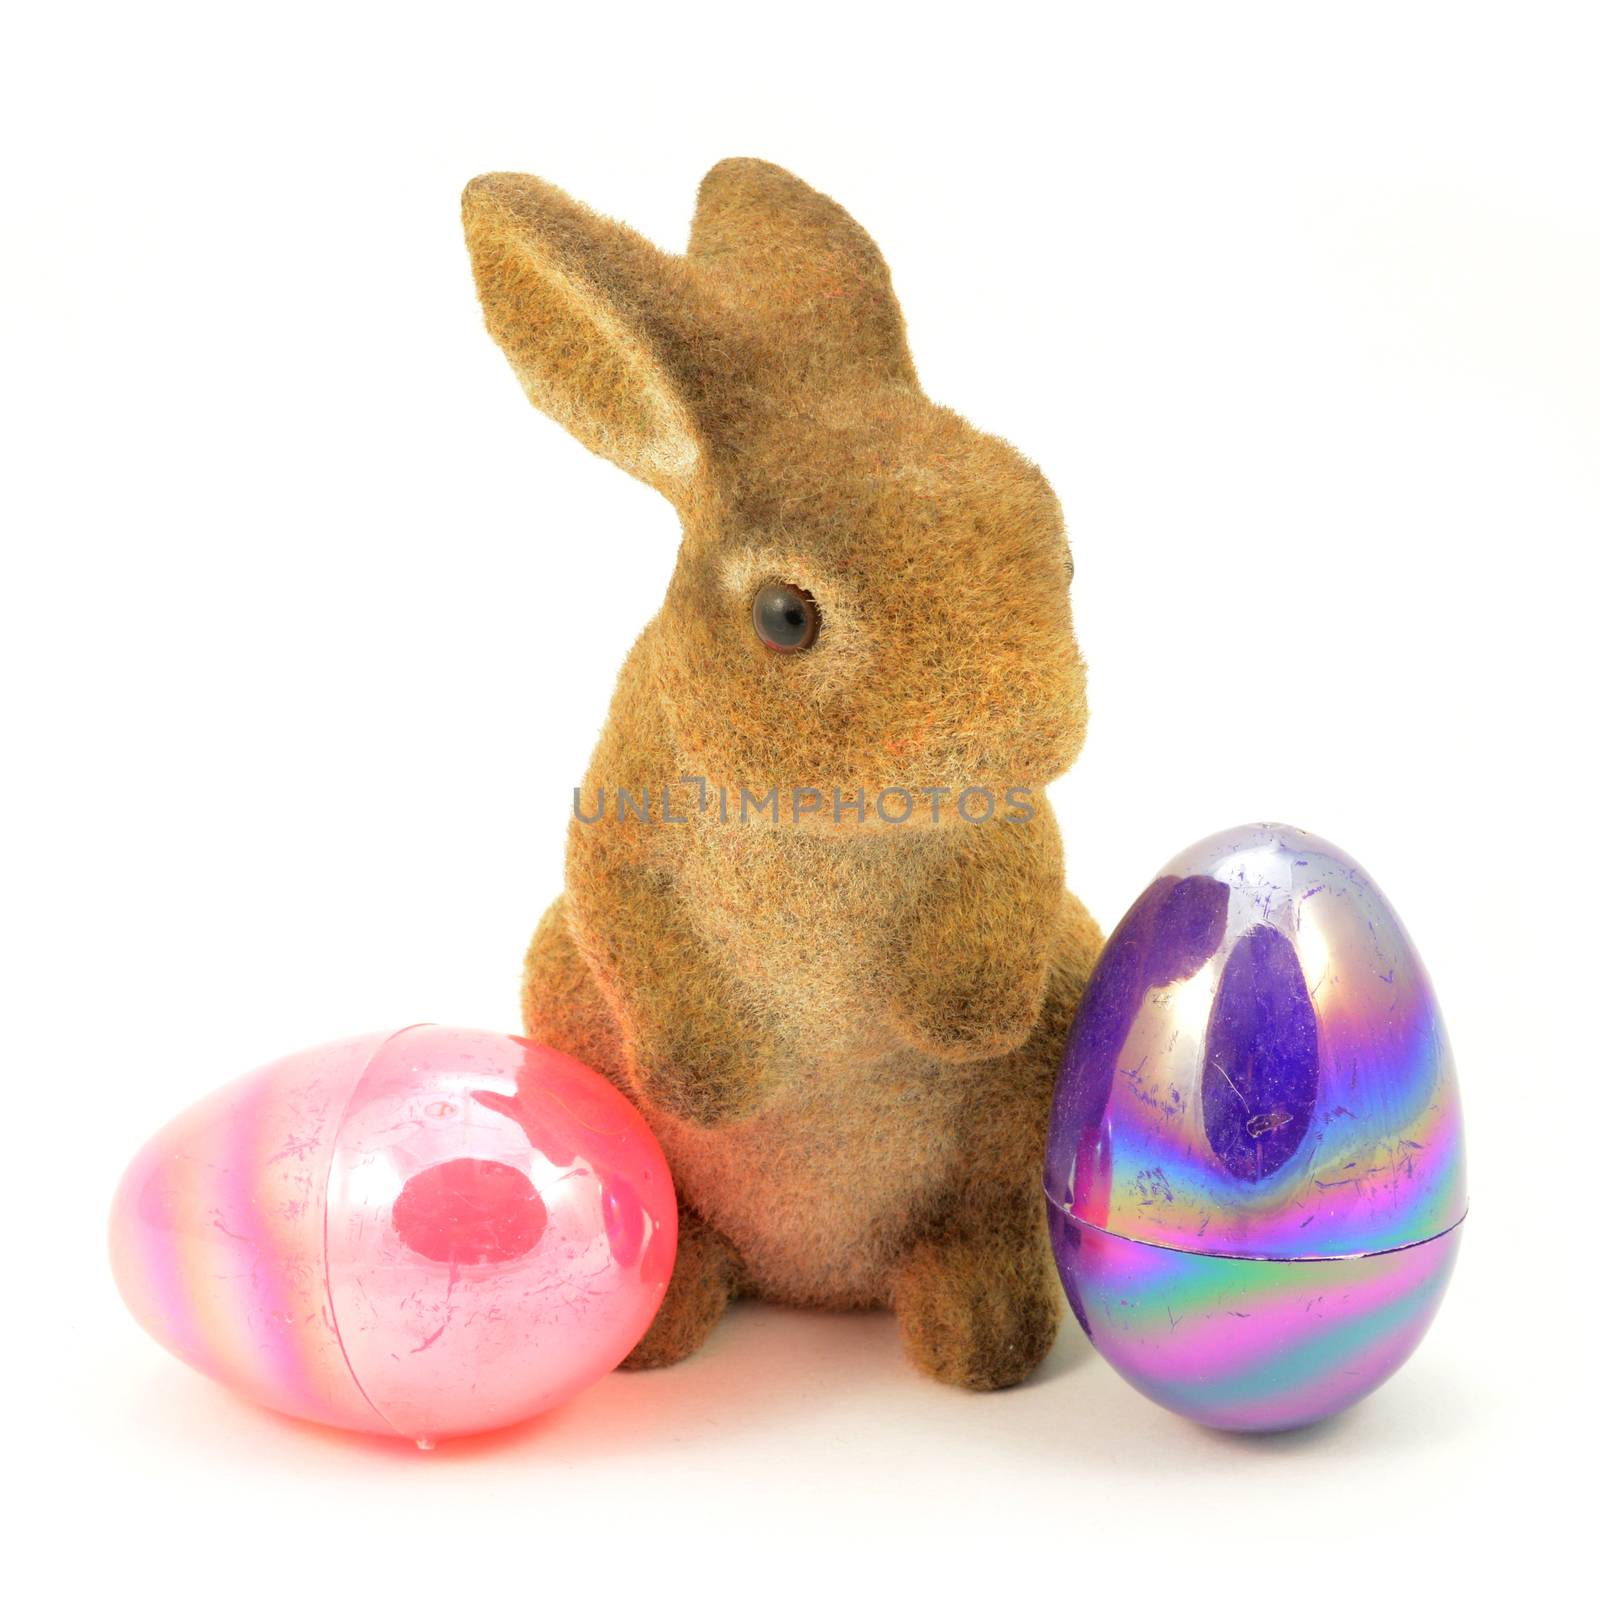 An isolated Easter Bunny with a couple eggs over a white background.